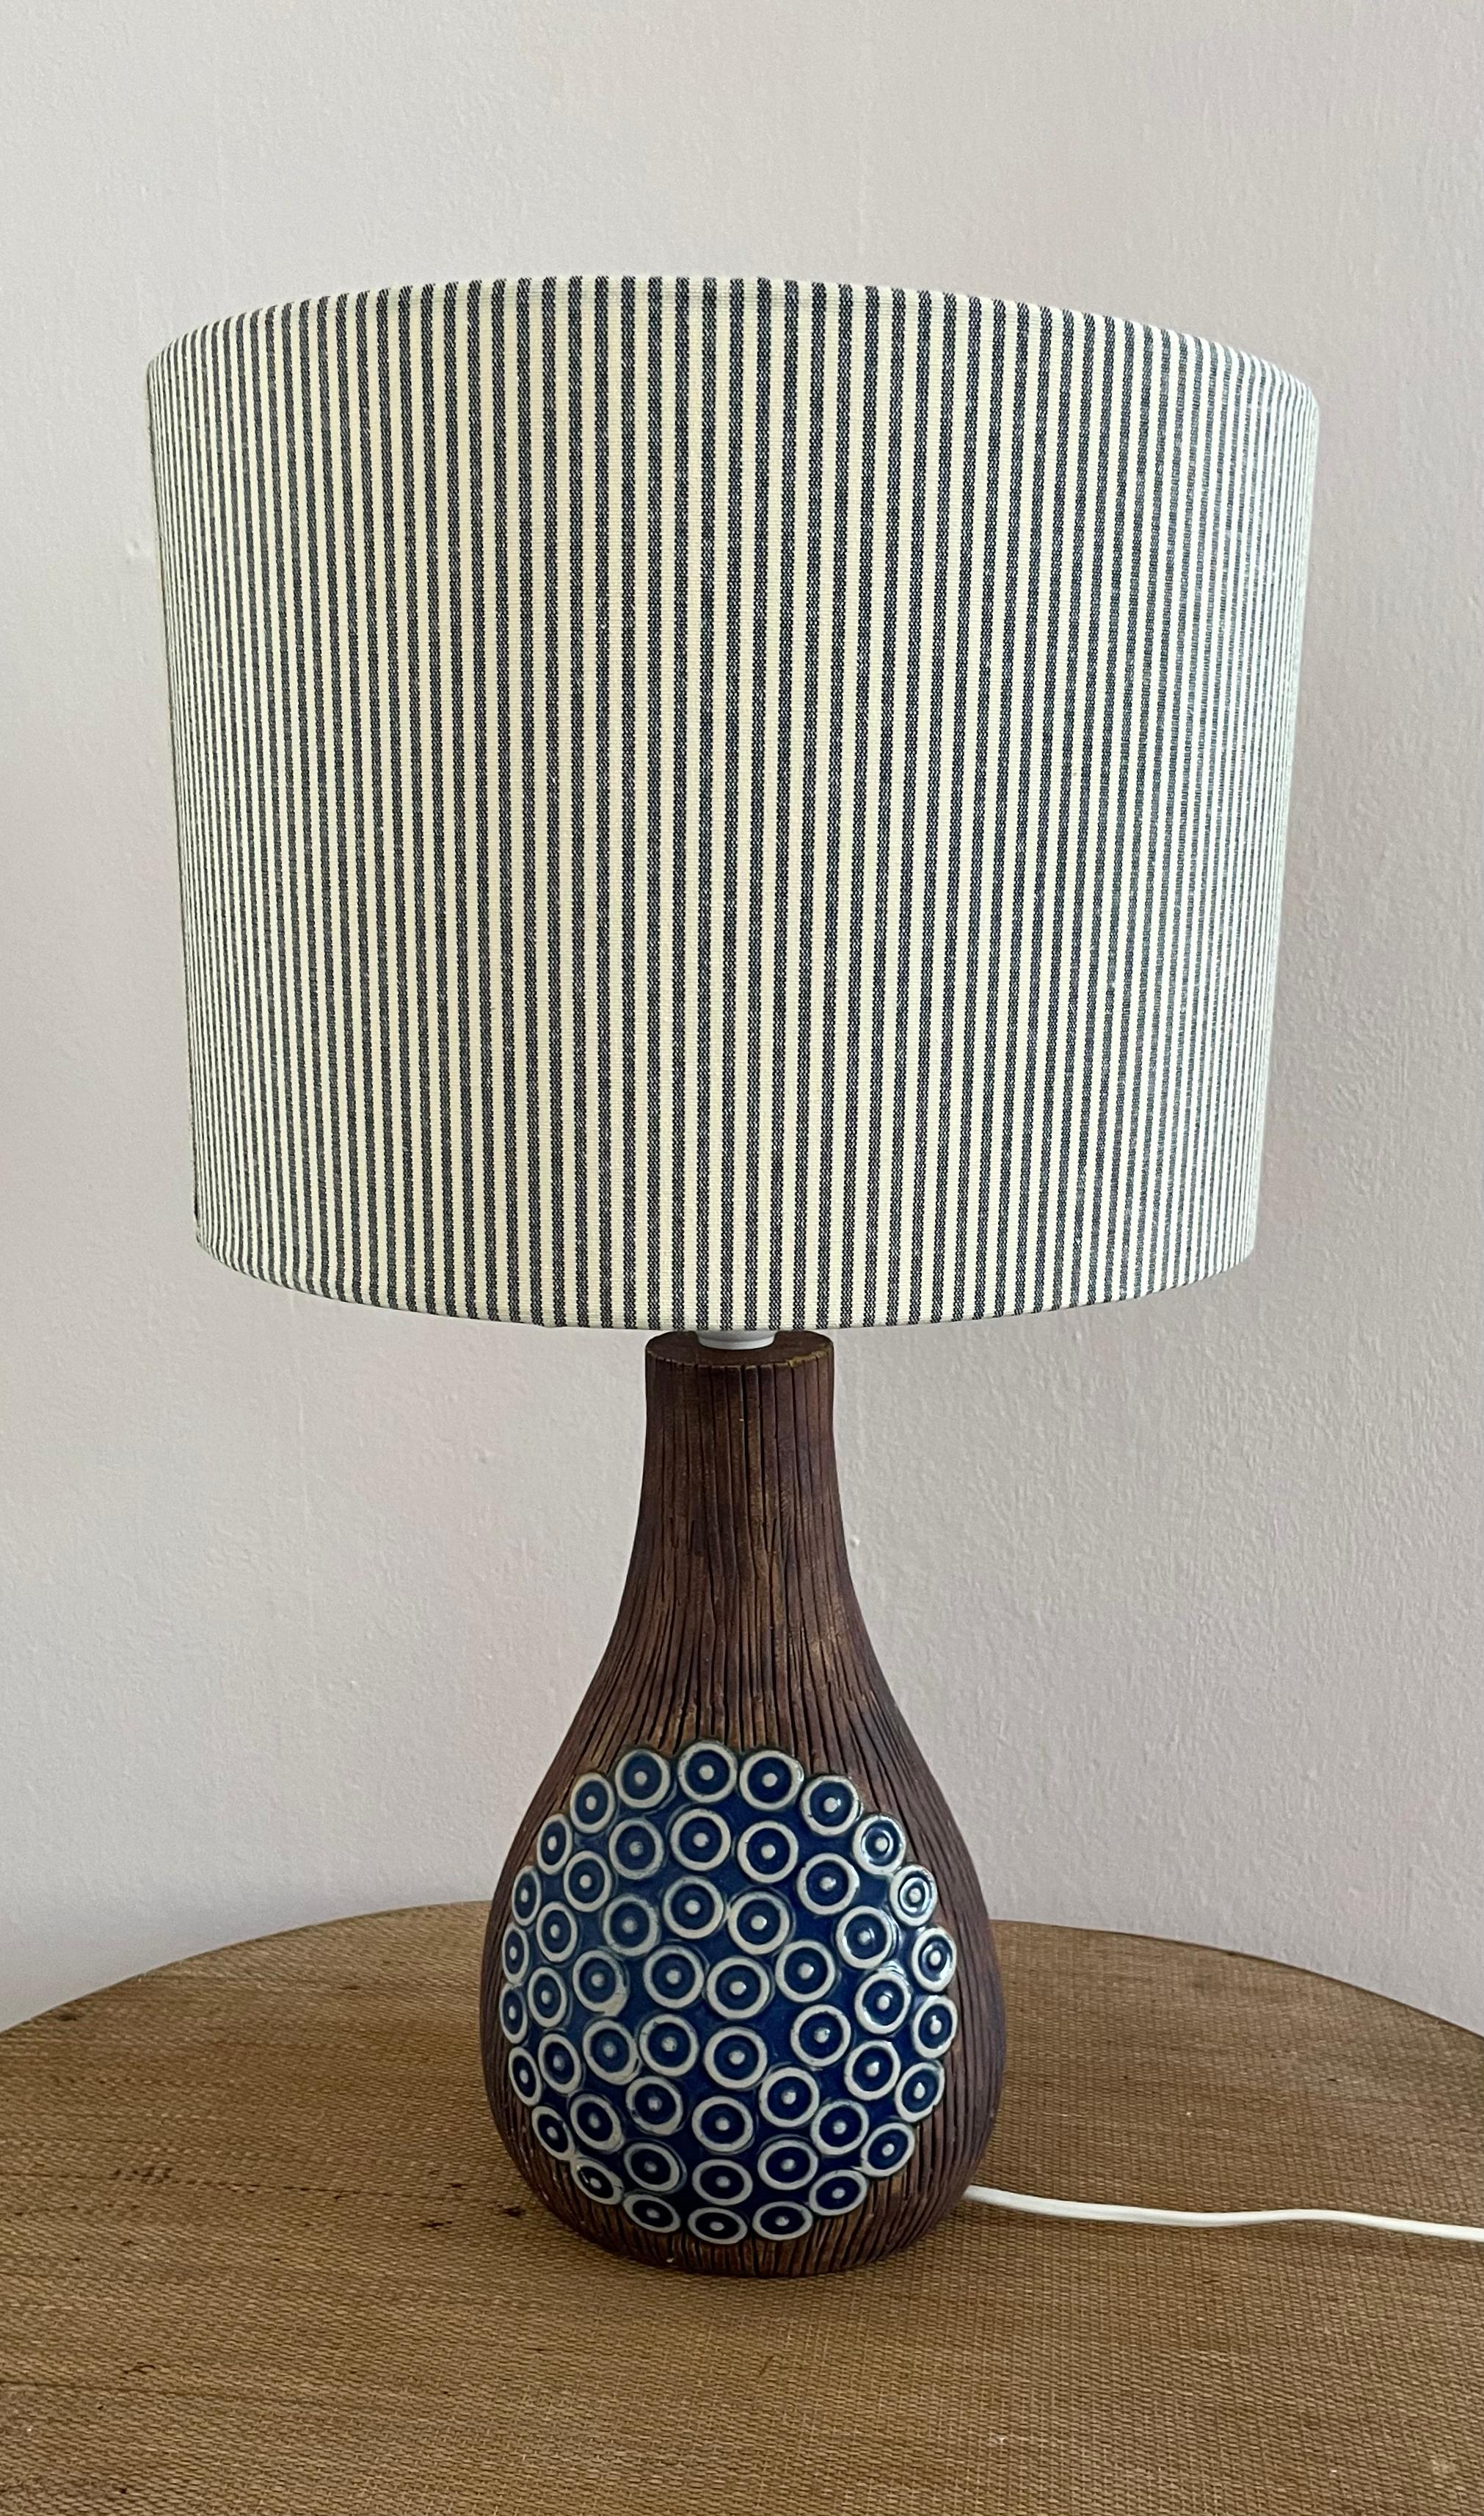 1970s decorated ceramic table lamp from Swedish Ego Stengods.
Made in the 1970s, this matte ceramic table lamp has a glossy blue and white glazed decoration on both sides. Made by Ego Stengods in Sweden. European wired with socket for E-27 light